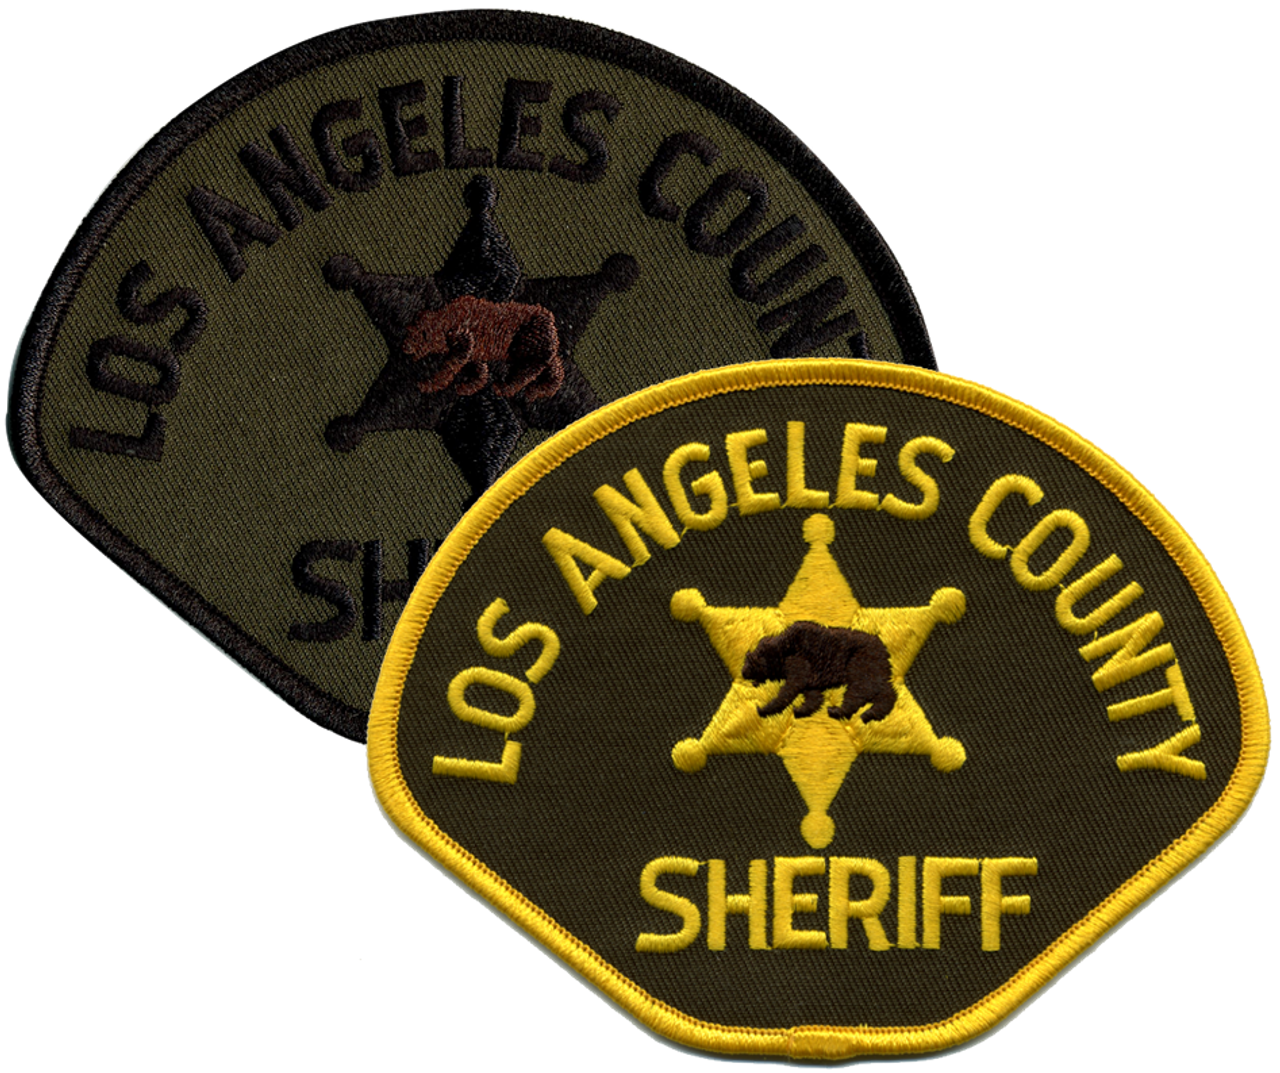 LOS ANGELES POLICE DEPARTMENT SHOULDER PATCH: Tactical Subdued